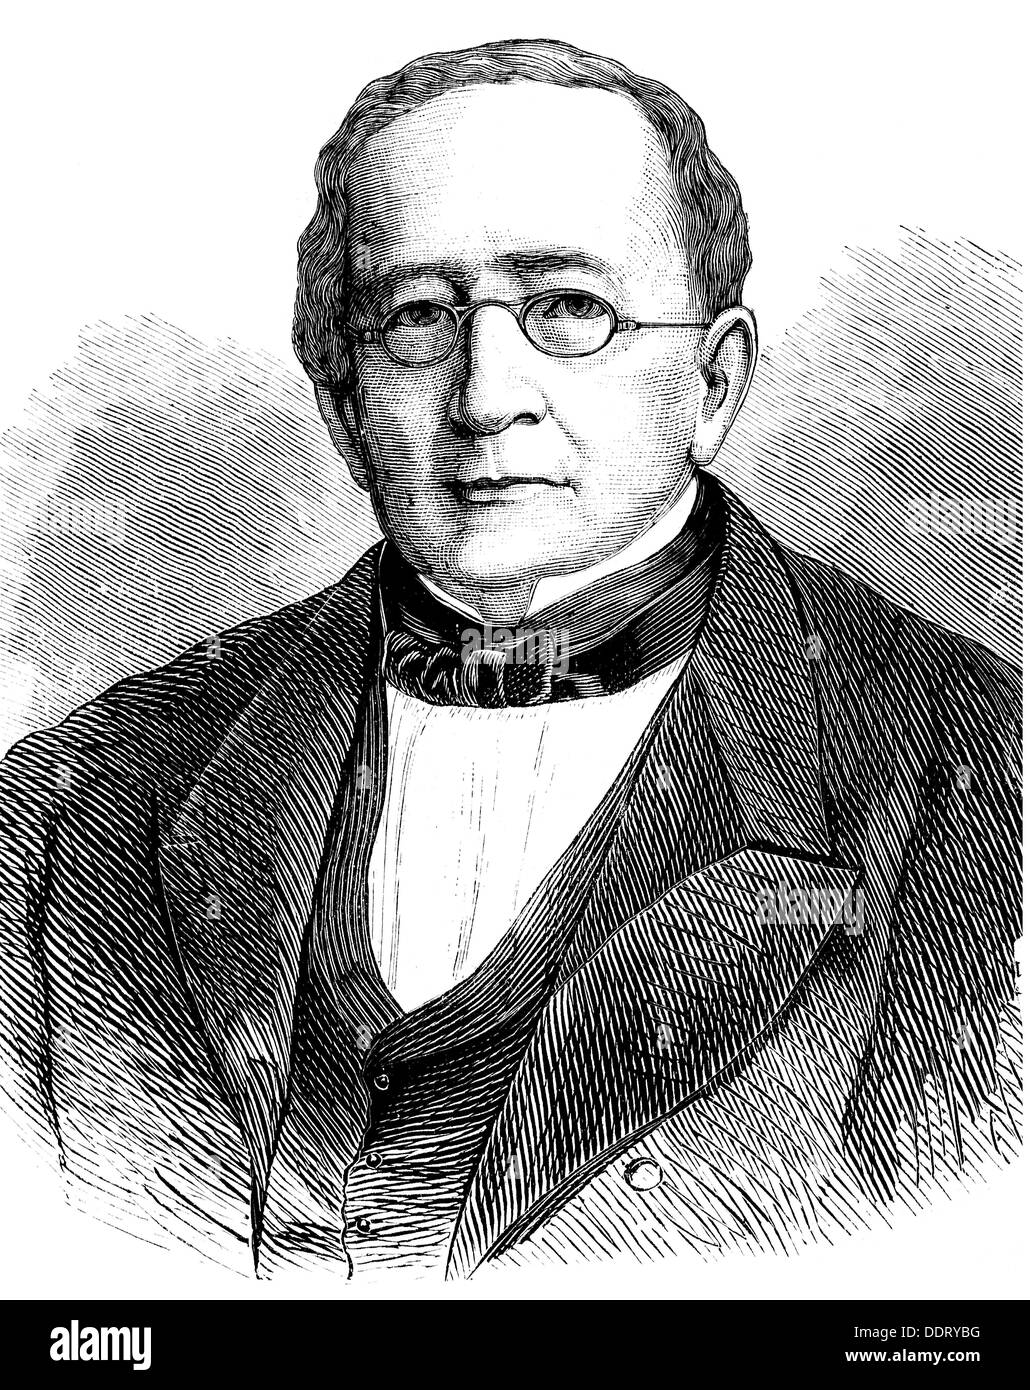 Gorchakov, Alexander Mikhailovich, 15.7.1798 - 11.3.1883, Russian diplomat and politician, Foreign Minister 1856 - 1882, Chancellor 1863 - 1882, portrait, wood engraving, 19th century, Stock Photo